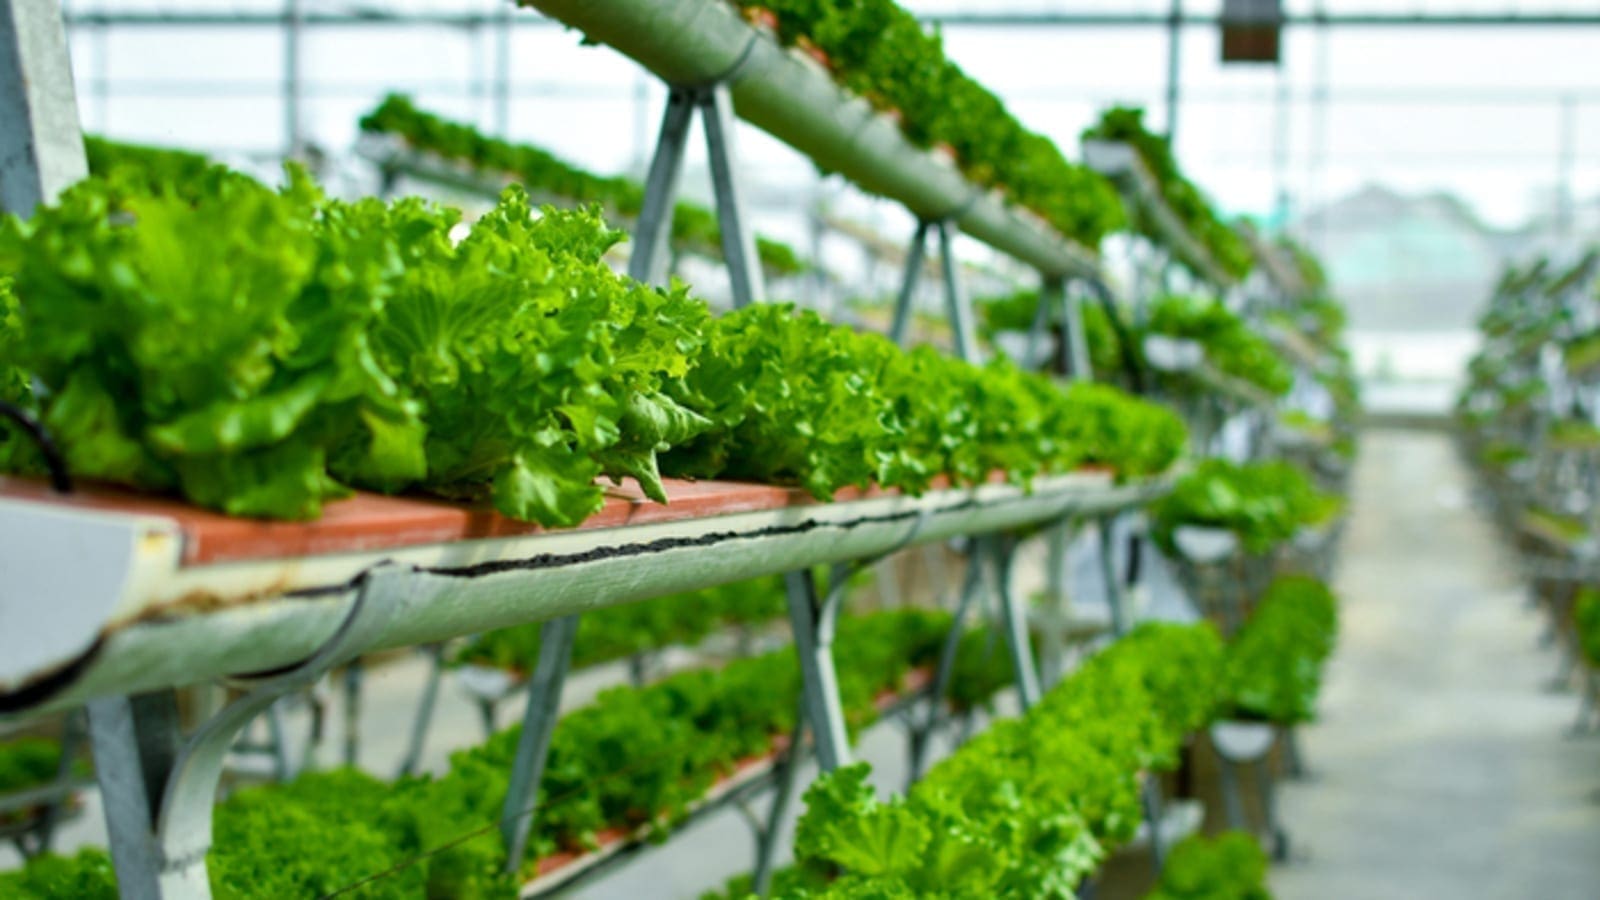 Vertical Future partners GreenBridge to accelerate the deployment of vertical farms across the Middle East